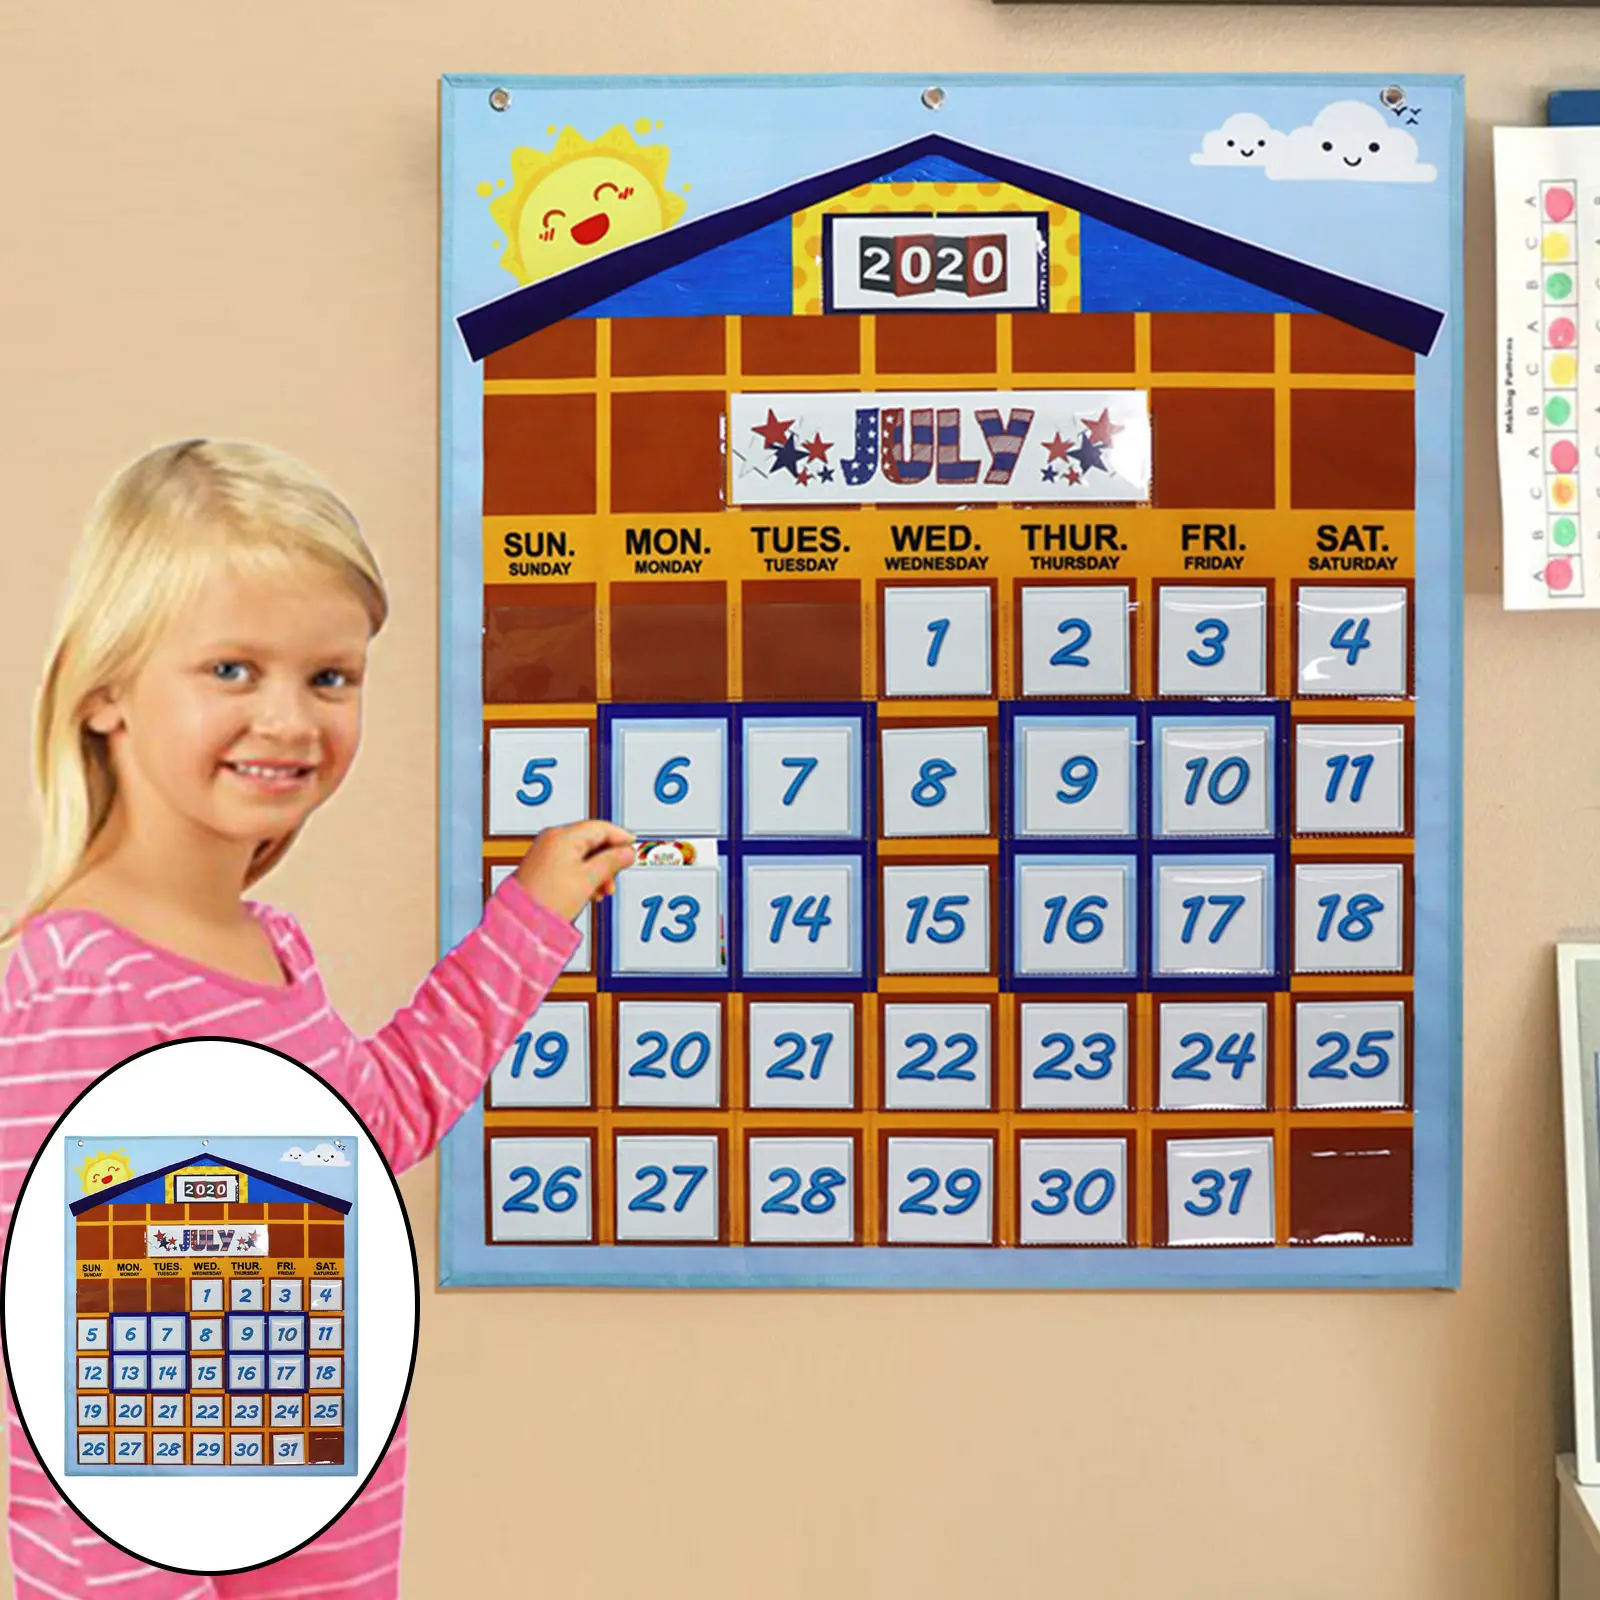 Monthly Wall Calendar Hanging Bag Classroom Supplies Space Saving convenient Learning Tool Pocket Chart for Teaching School Kids